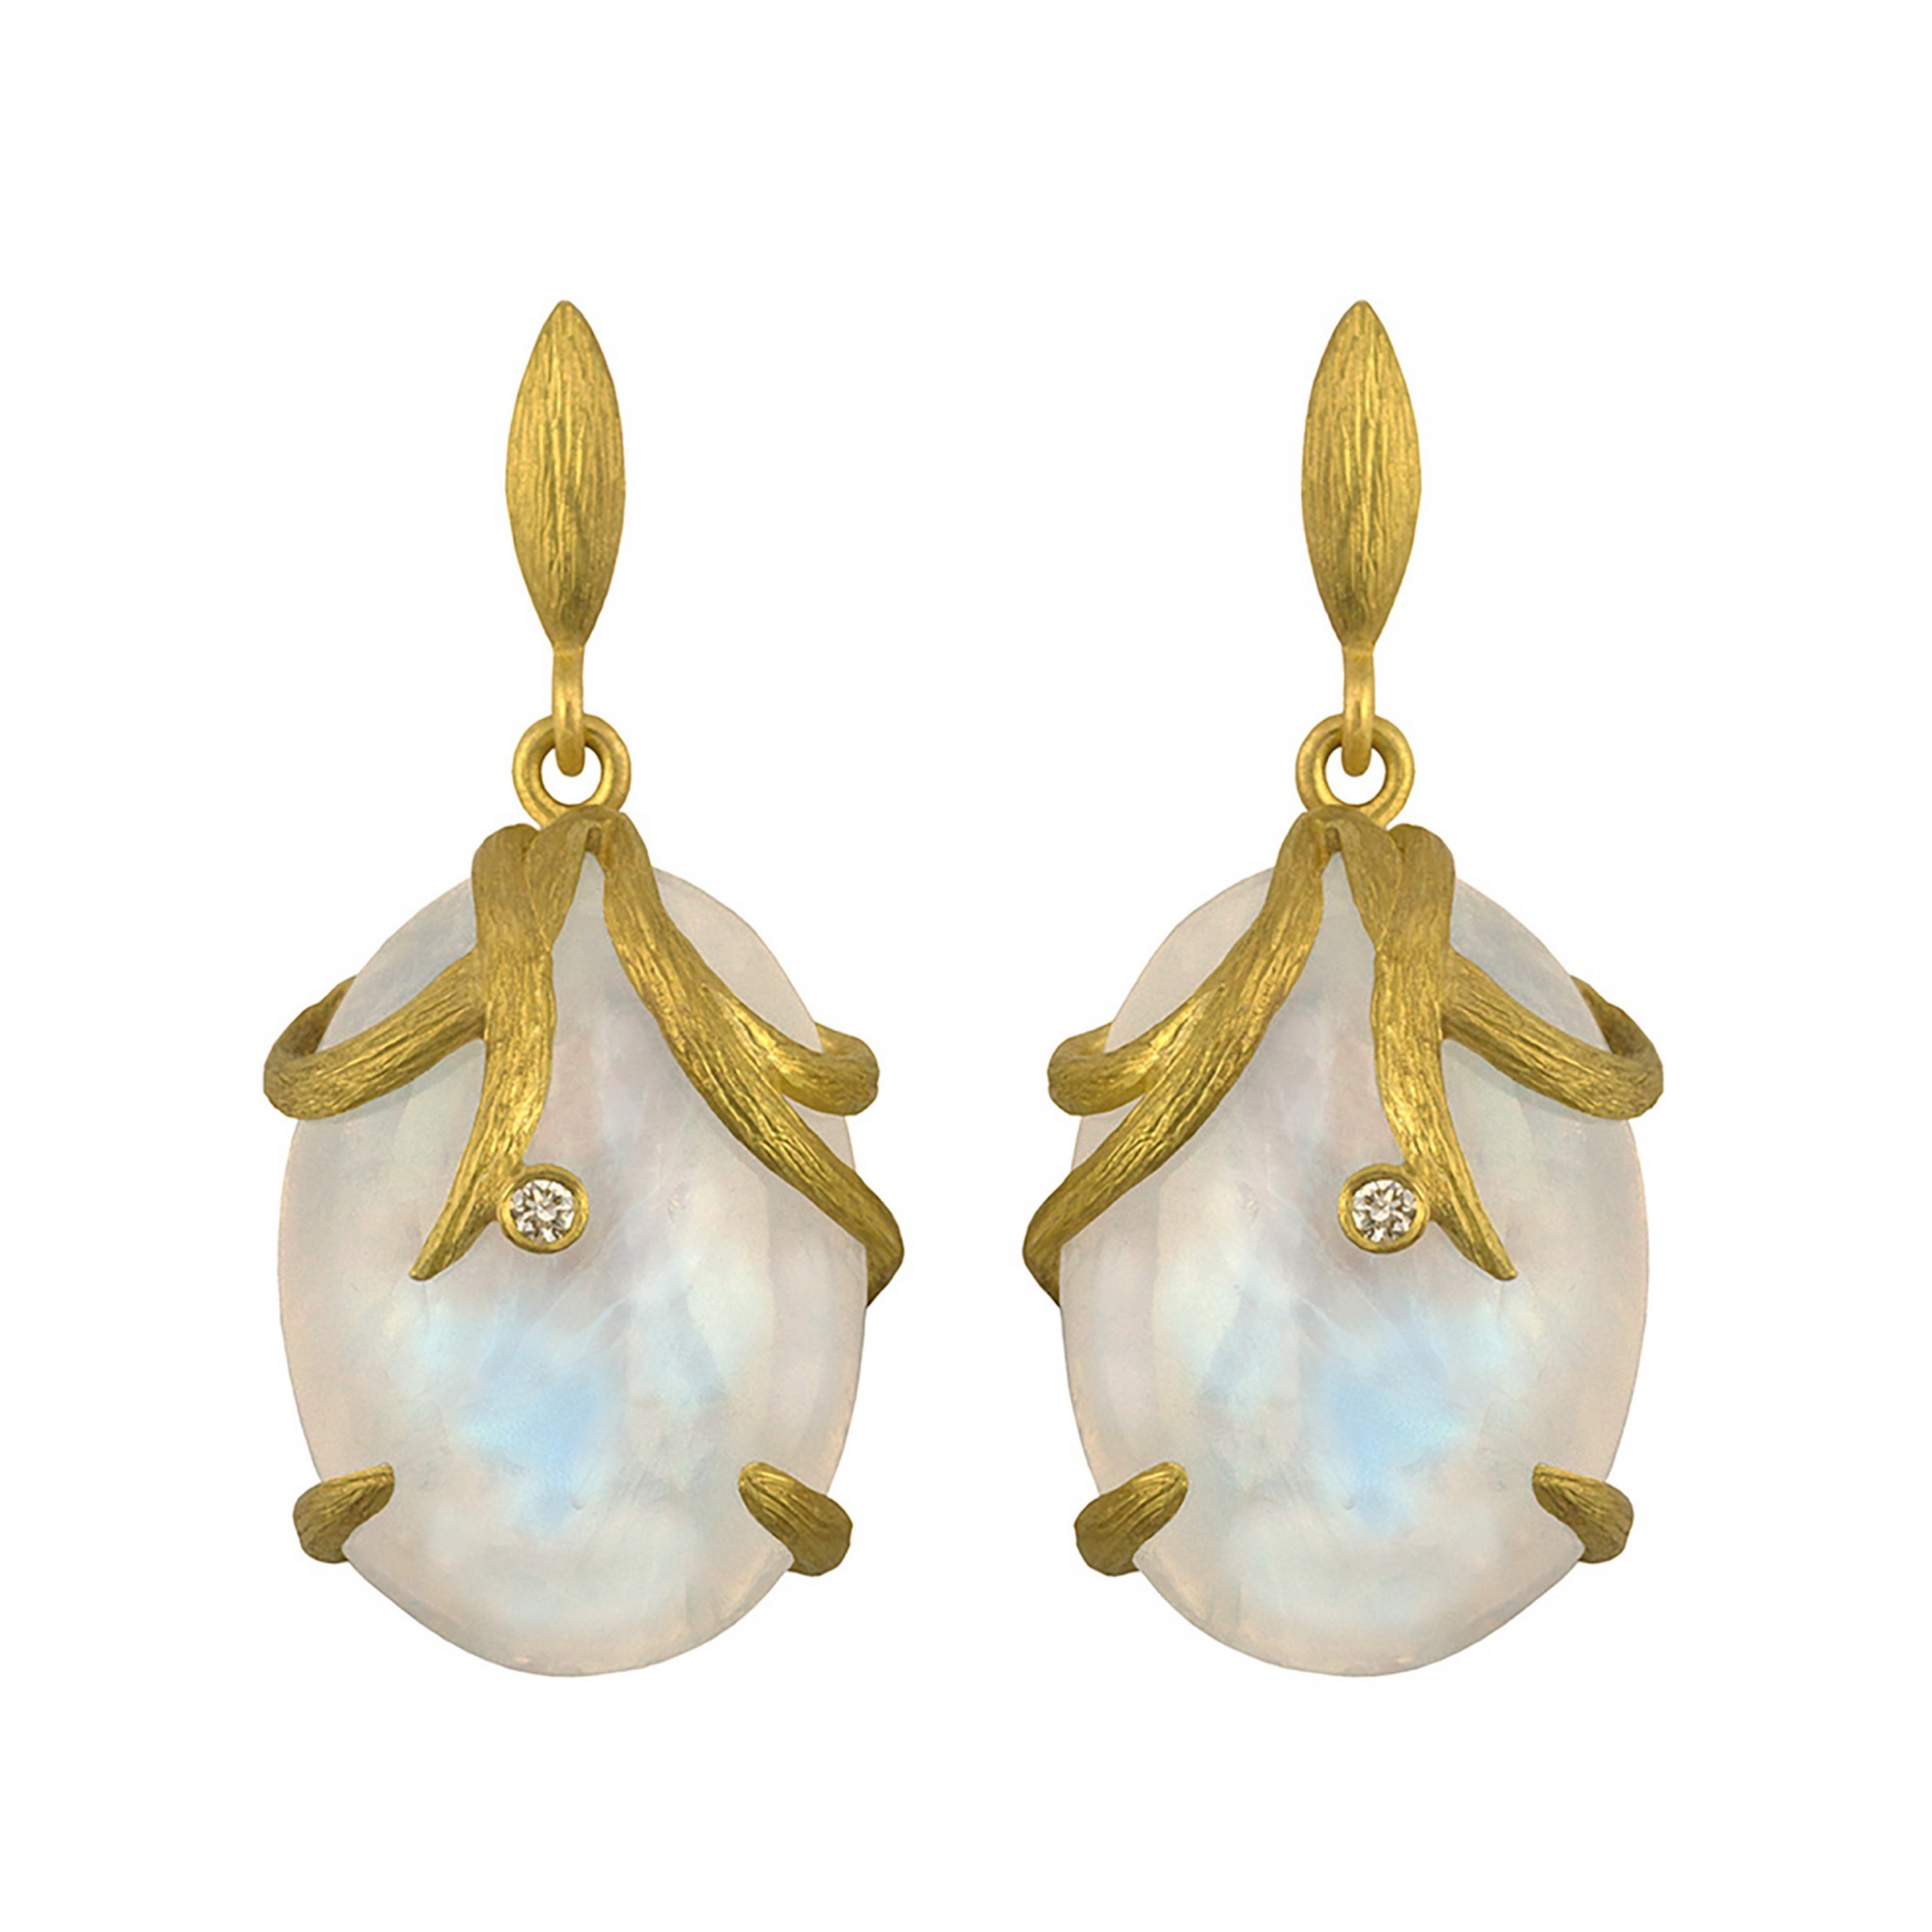 Rainbow Moonstone Vine Wrapped Oval Earrings by Laurie Kaiser available at Talisman Collection Fine Jewelers in El Dorado Hills, CA and online. The combination of rainbow moonstones and white diamonds set in 18k yellow gold creates a stunning yet subtle design that is perfect for everyday wear. With a total diamond weight of 0.03 carats, these earrings will add just the right amount of sparkle to your look.